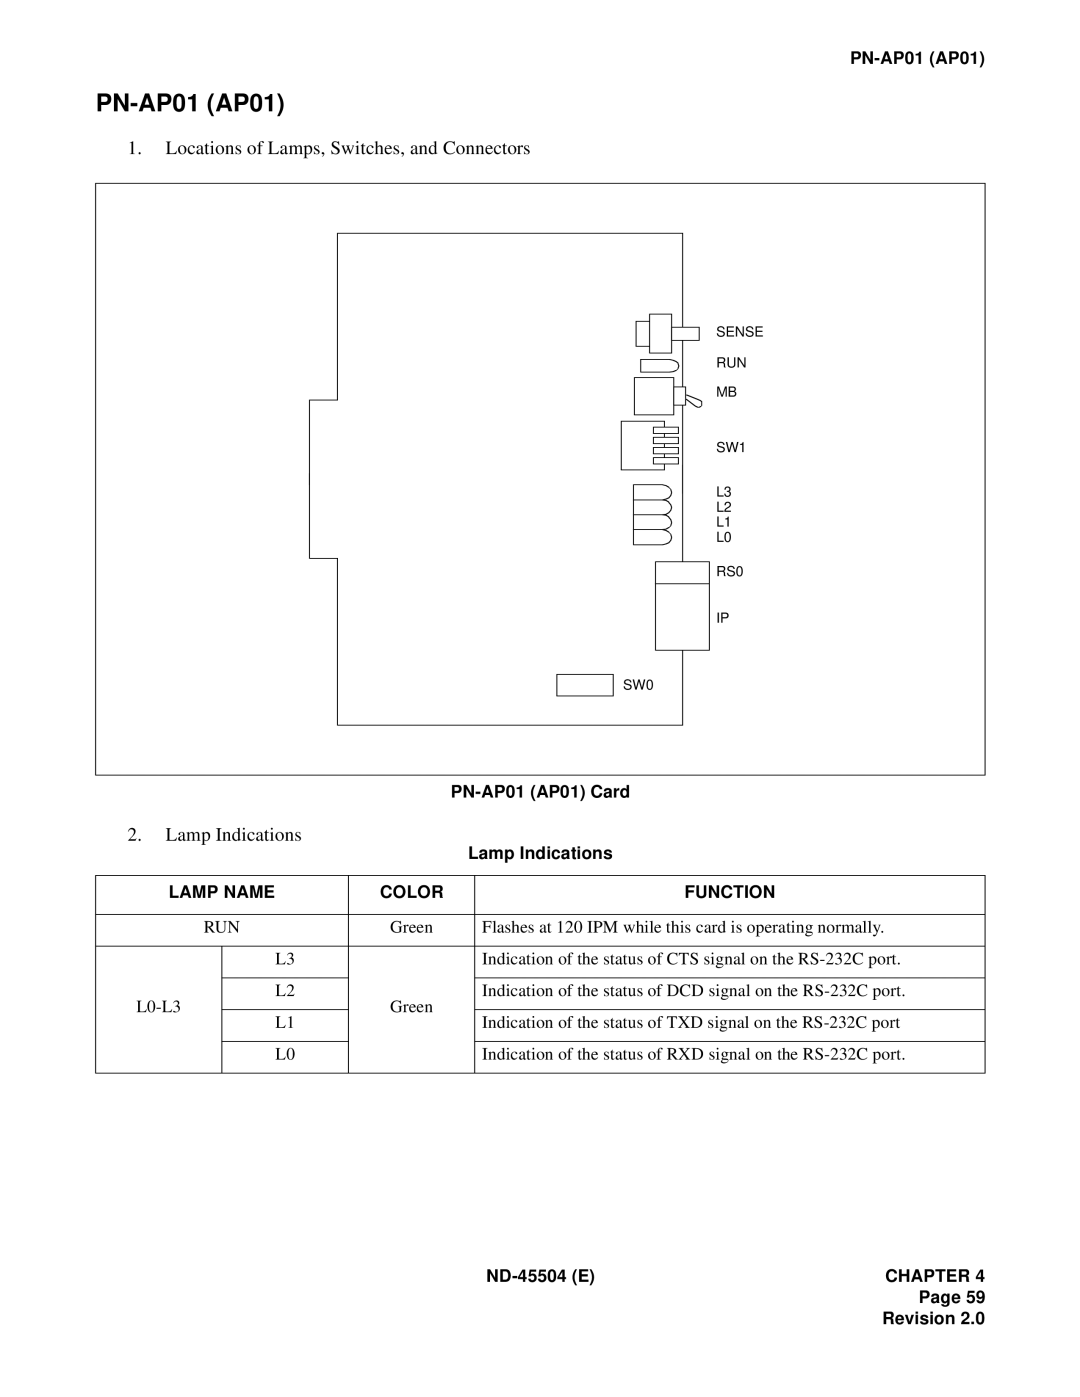 NEC 2000 IVS manual Locations of Lamps, Switches, and Connectors, Lamp Indications, PN-AP01AP01 Card, Lamp Name, Color 